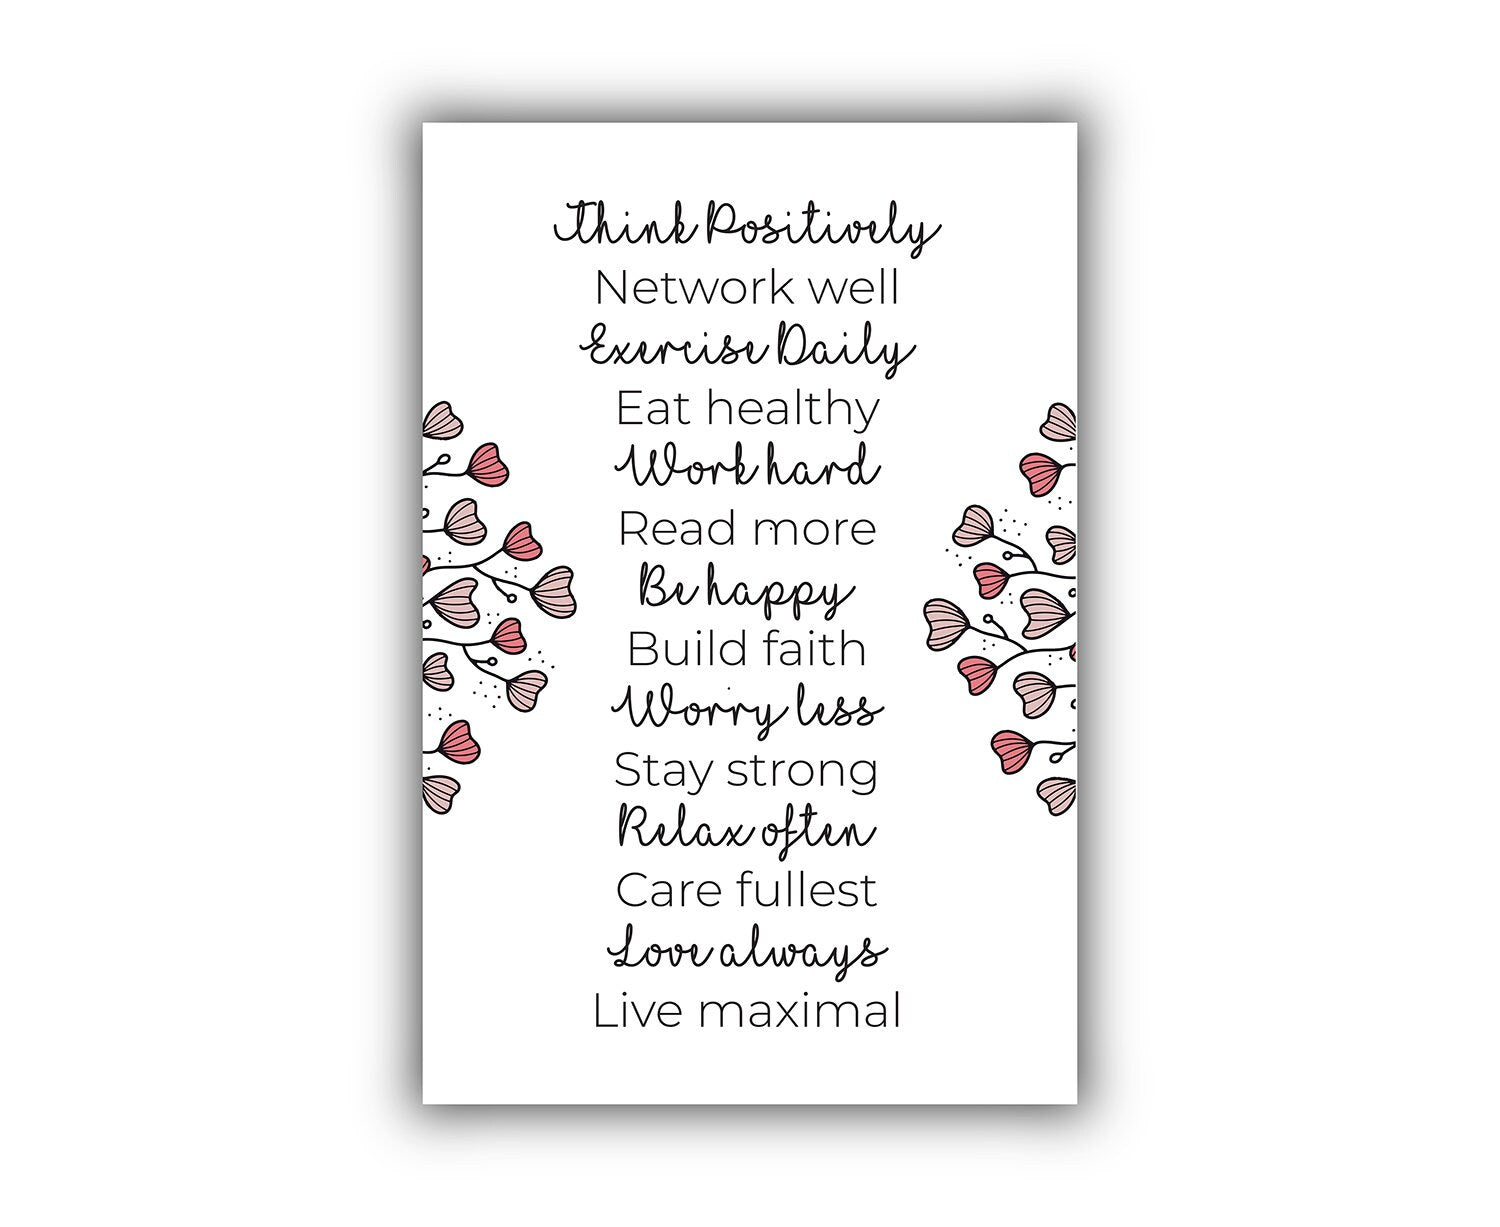 Think positively network well, Poster print, Home wall decor, Quote print, Motivational quote print, Office wall decor, Entrepreneur Posters